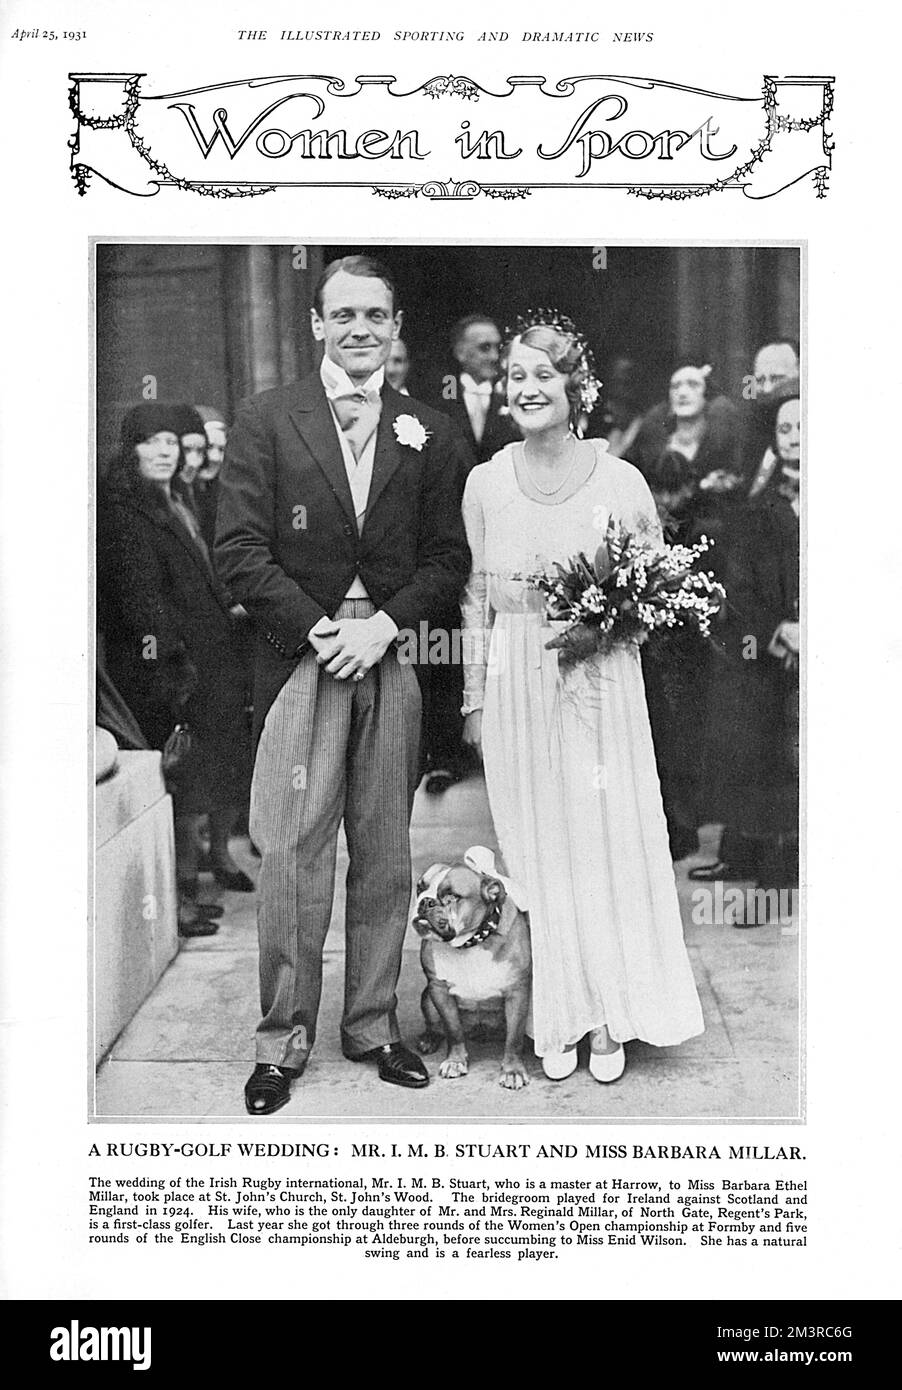 The wedding of Irish rugby international Mr I. M. B. Stuart (also a master at Harrow School) and Miss Barbara Ethel Millar, a first-class golfer, at St. John's Church in St. John's Wood in April 1931.  They are attended by a bulldog who wears a ribbon around his neck.         Date: 1931 Stock Photo